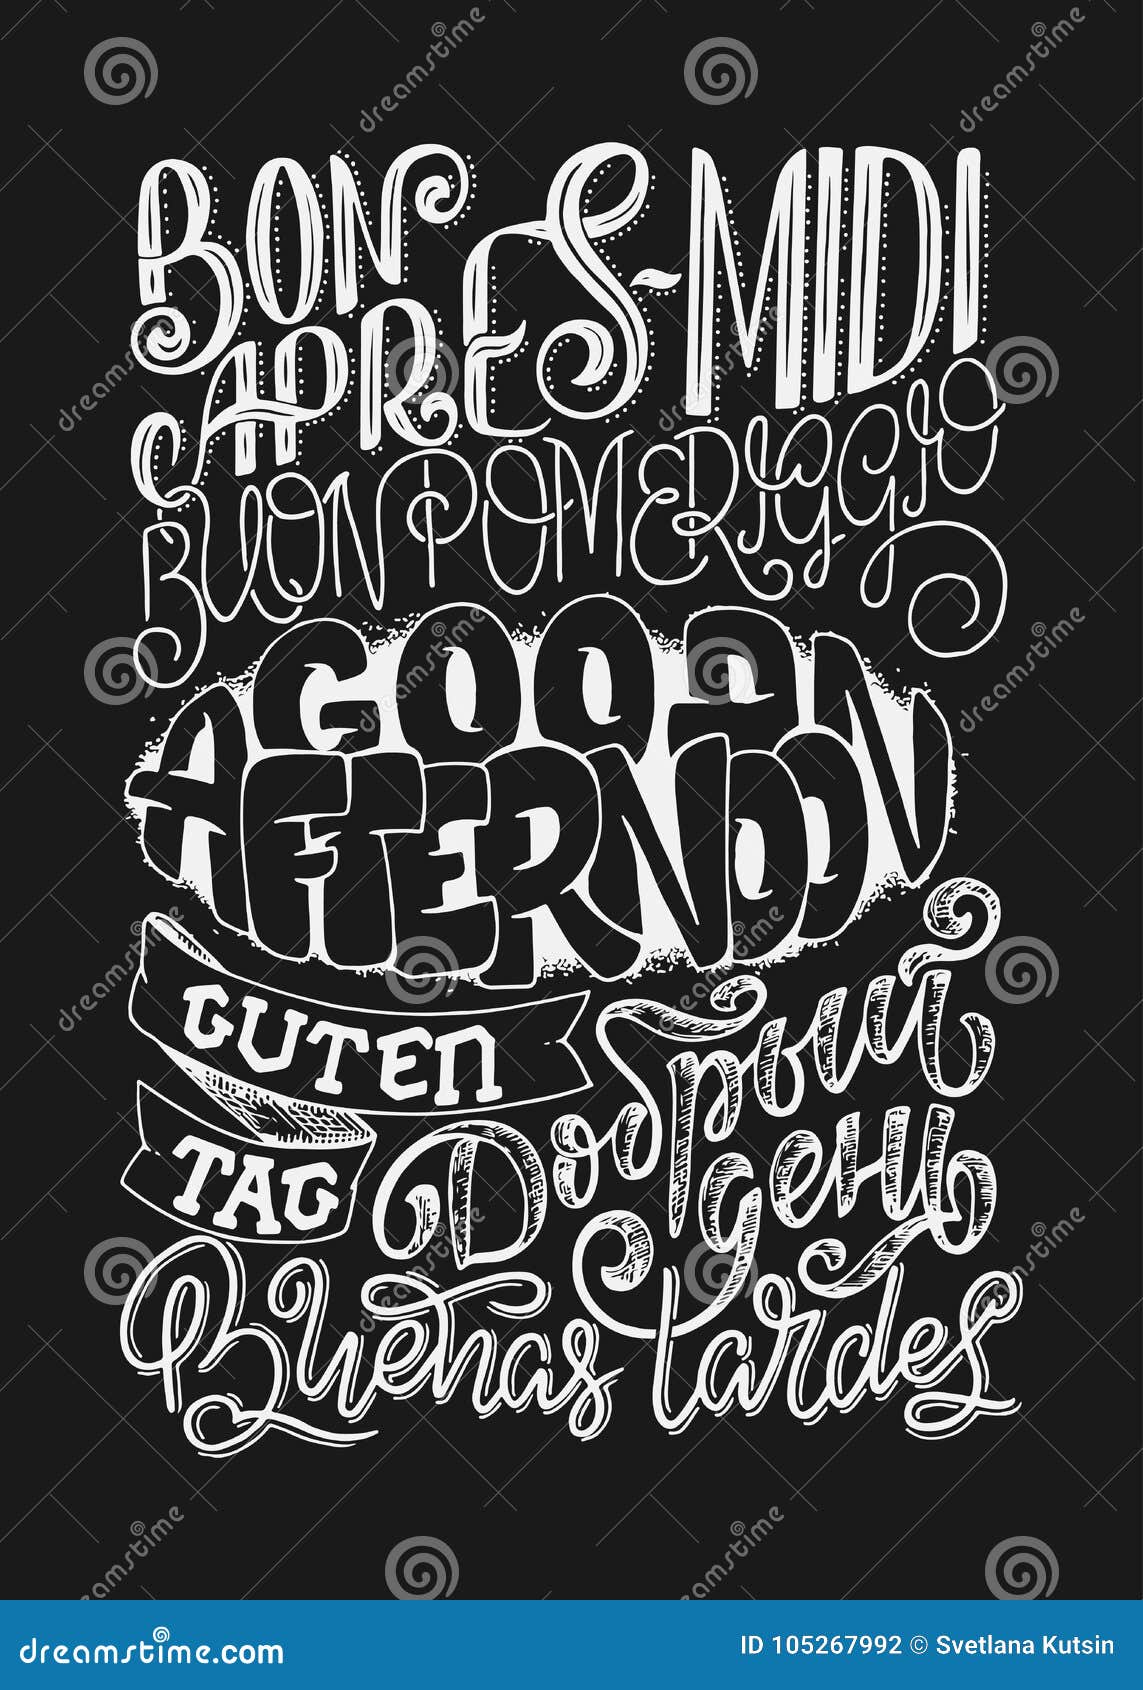 Good Afternoon Hand Drawn Lettering In Different Languages. Stock